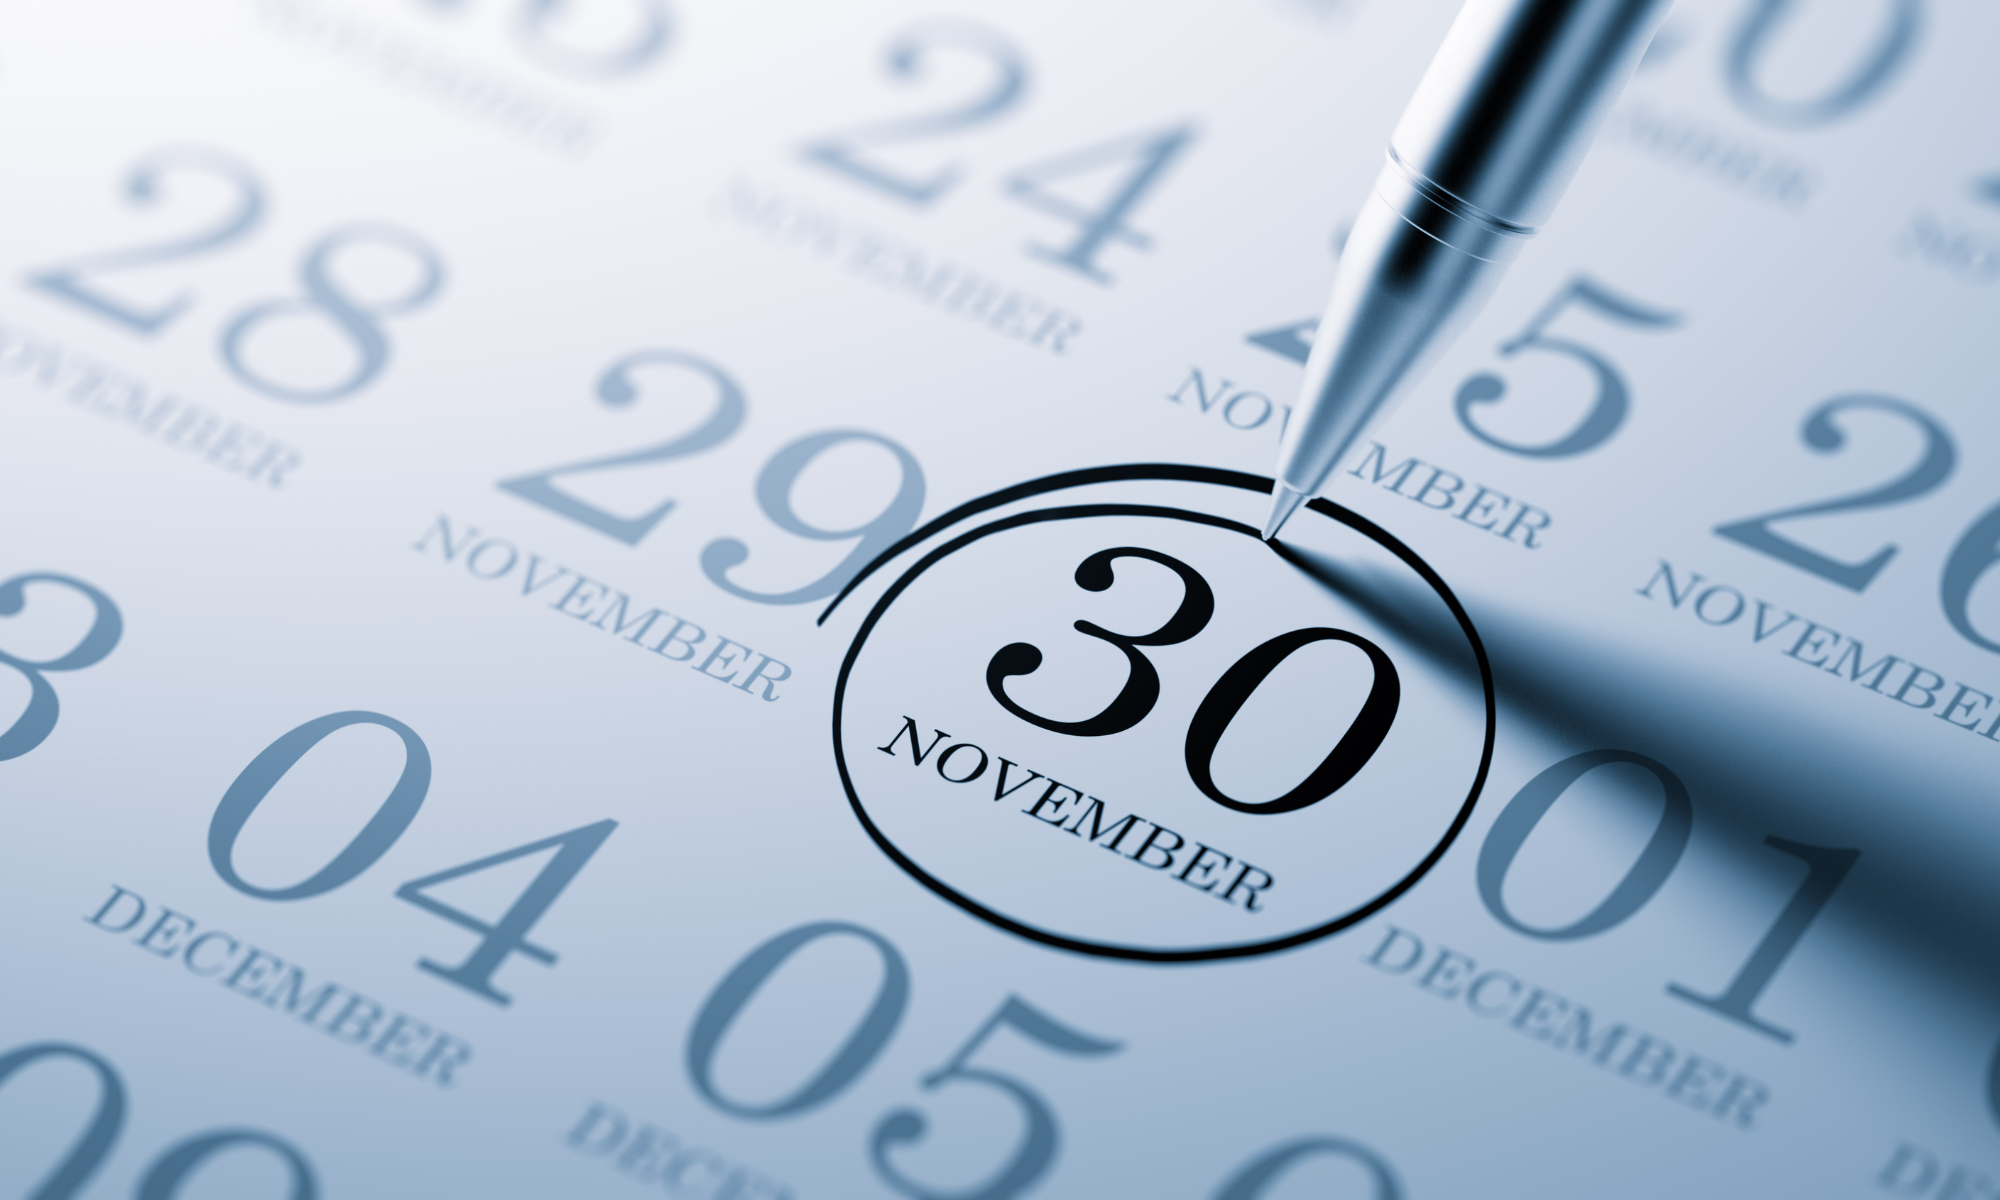 Director IDs - the 30 November deadline is fast approaching